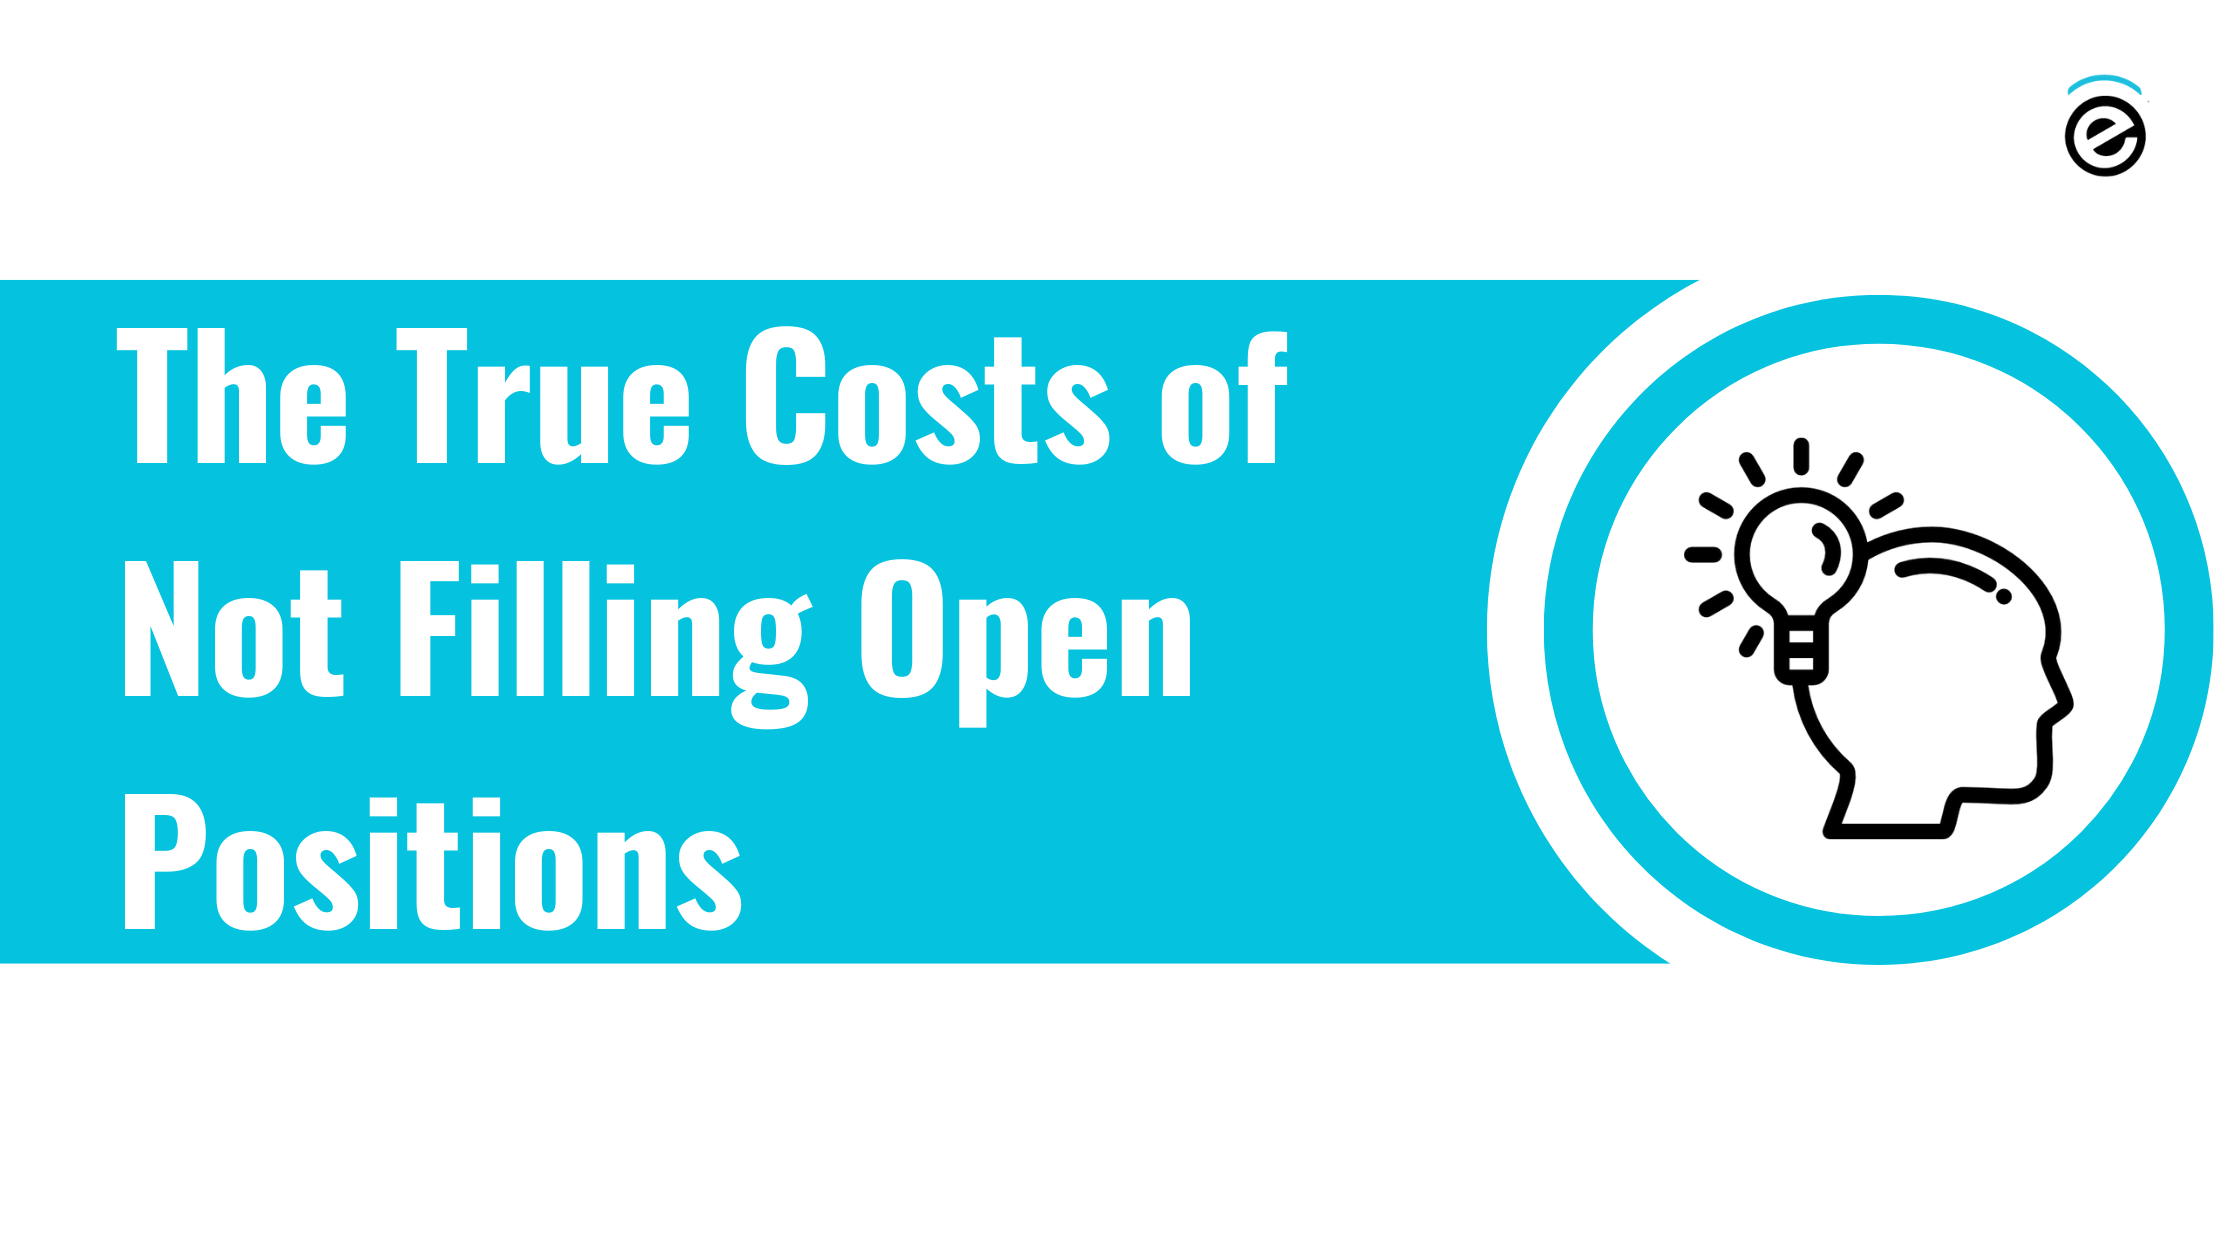 The True Costs of Not Filling Open Positions